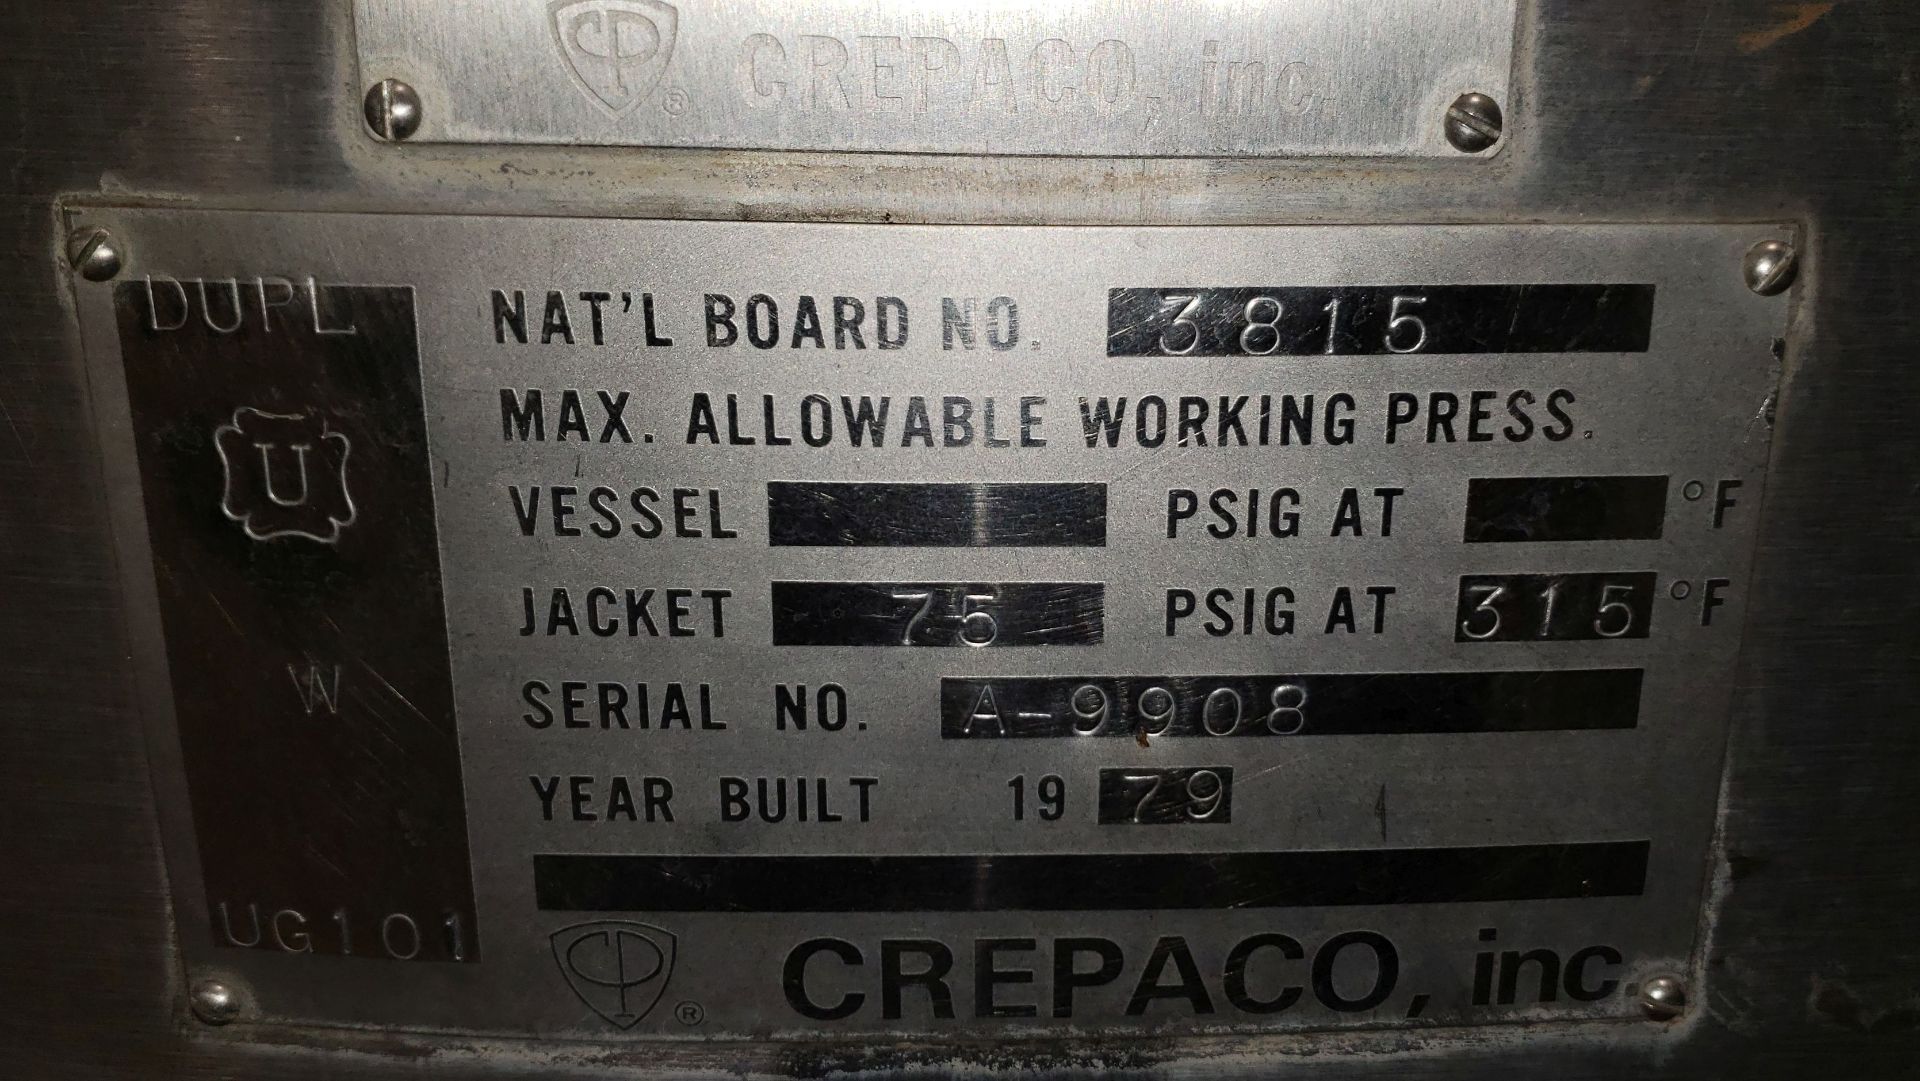 550 Gallon CREPACO Stainless Steel Processing Tank Nat'l Board #3815 - Image 2 of 18